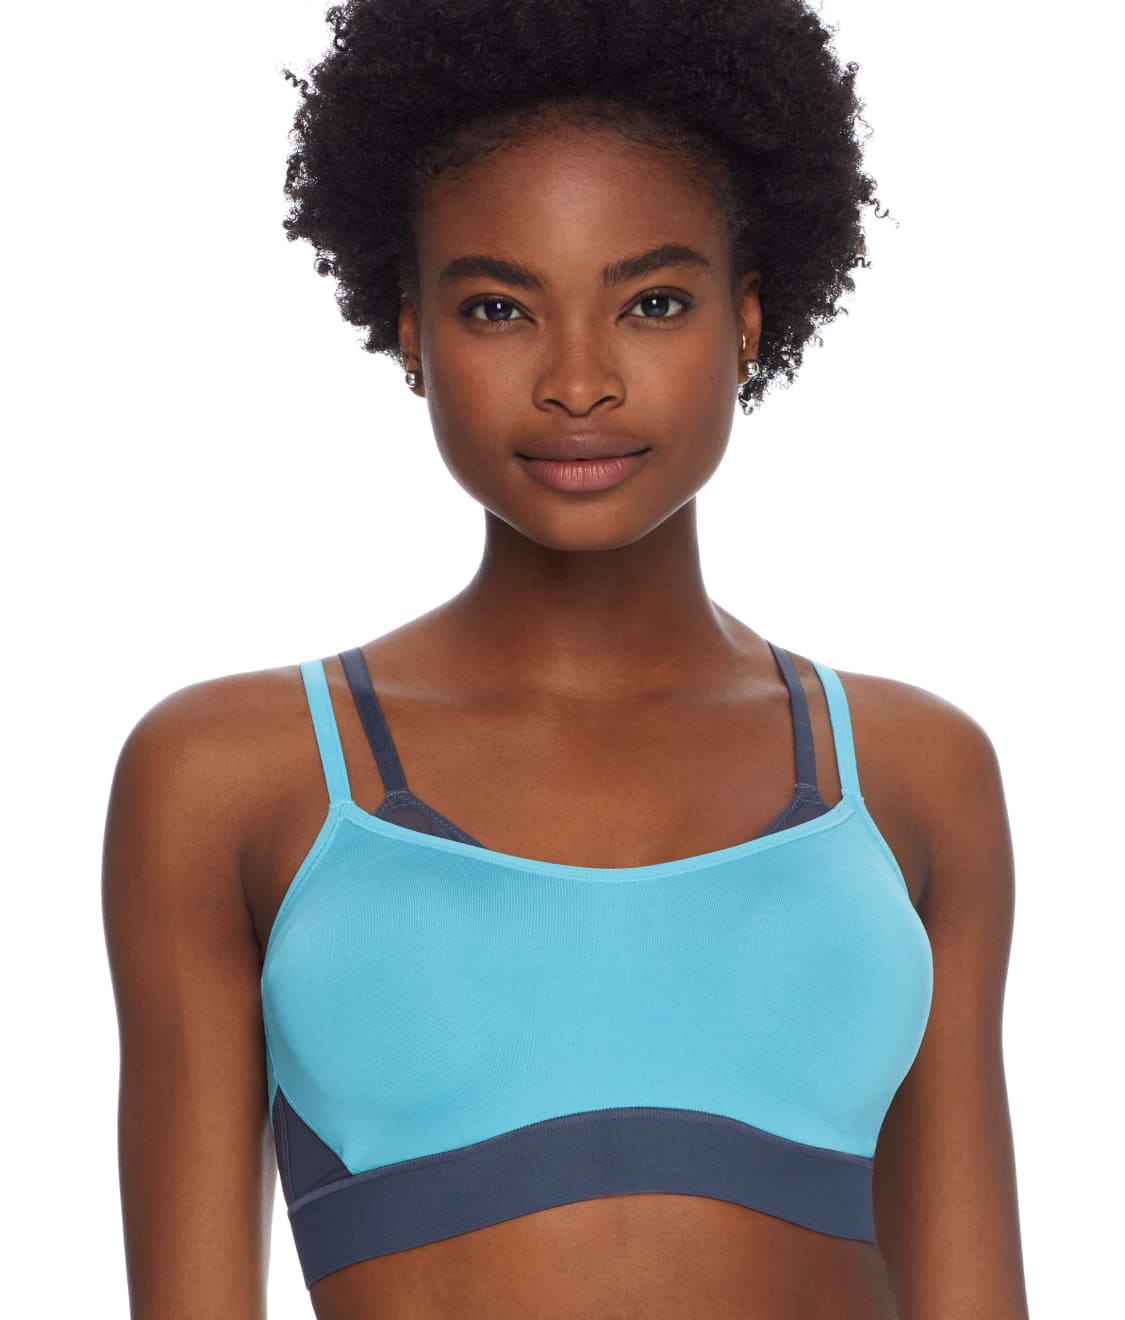 Looking For a Little Lift? These 9 Padded Sports Bras Offer So Much Support  #fitnessgymnearme